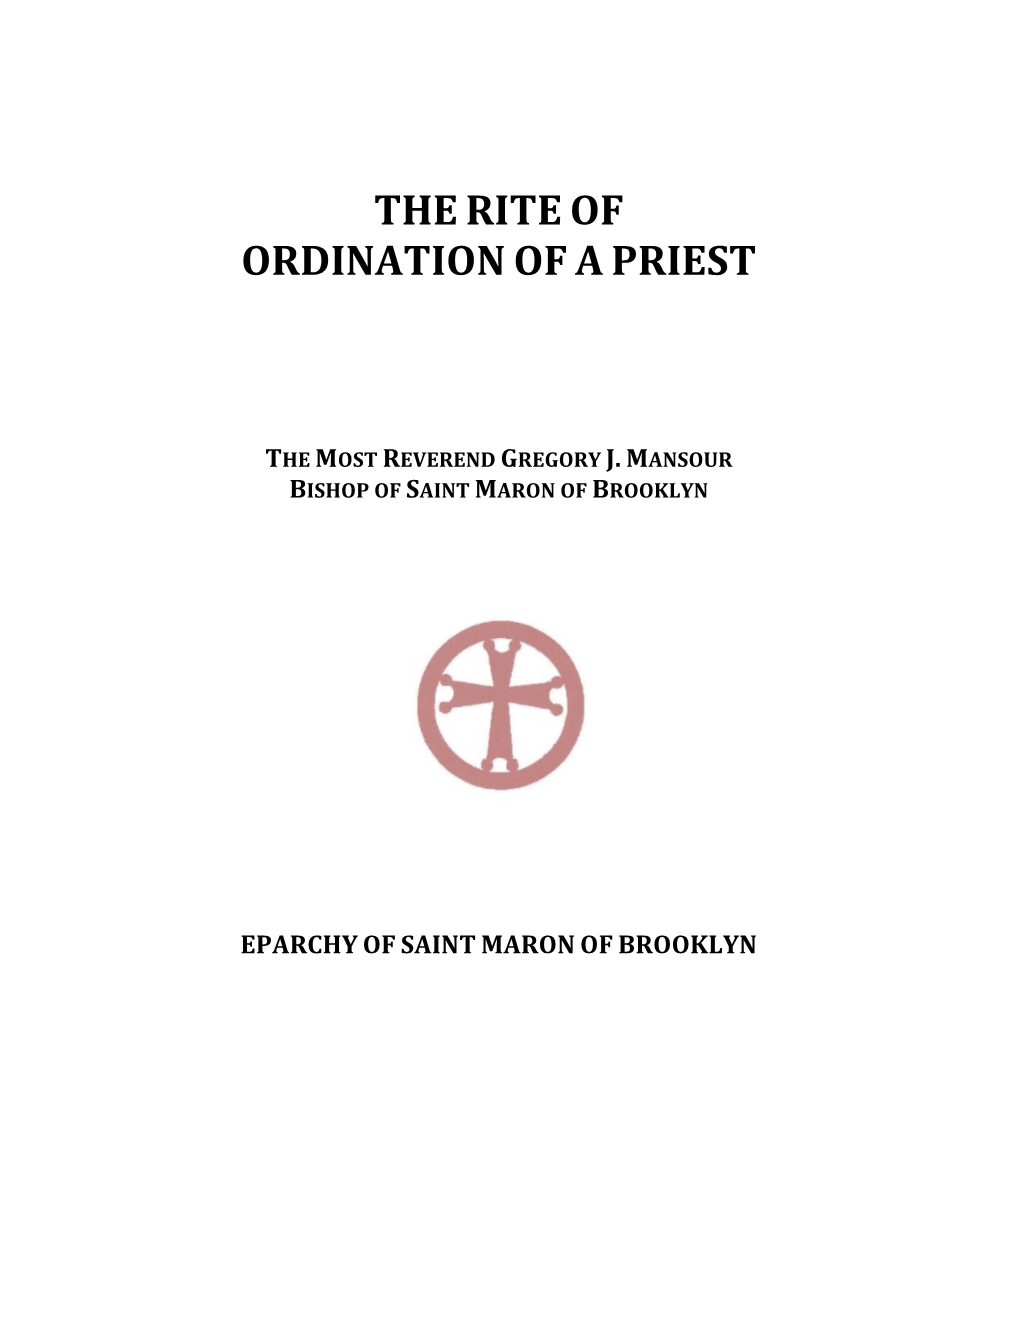 The Rite of Ordination of a Priest